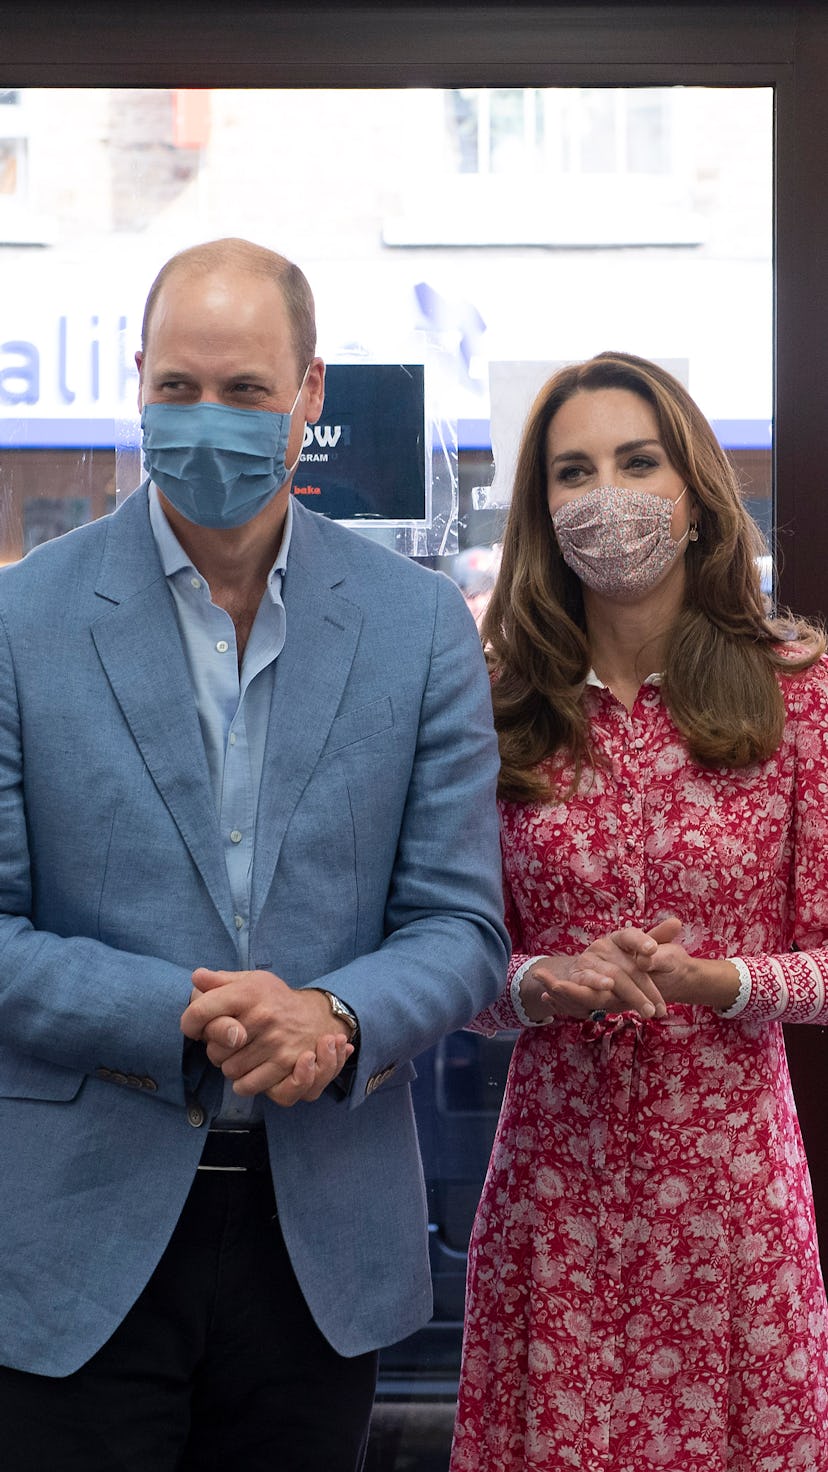 Kate Middleton and Prince William Pose With Face Masks